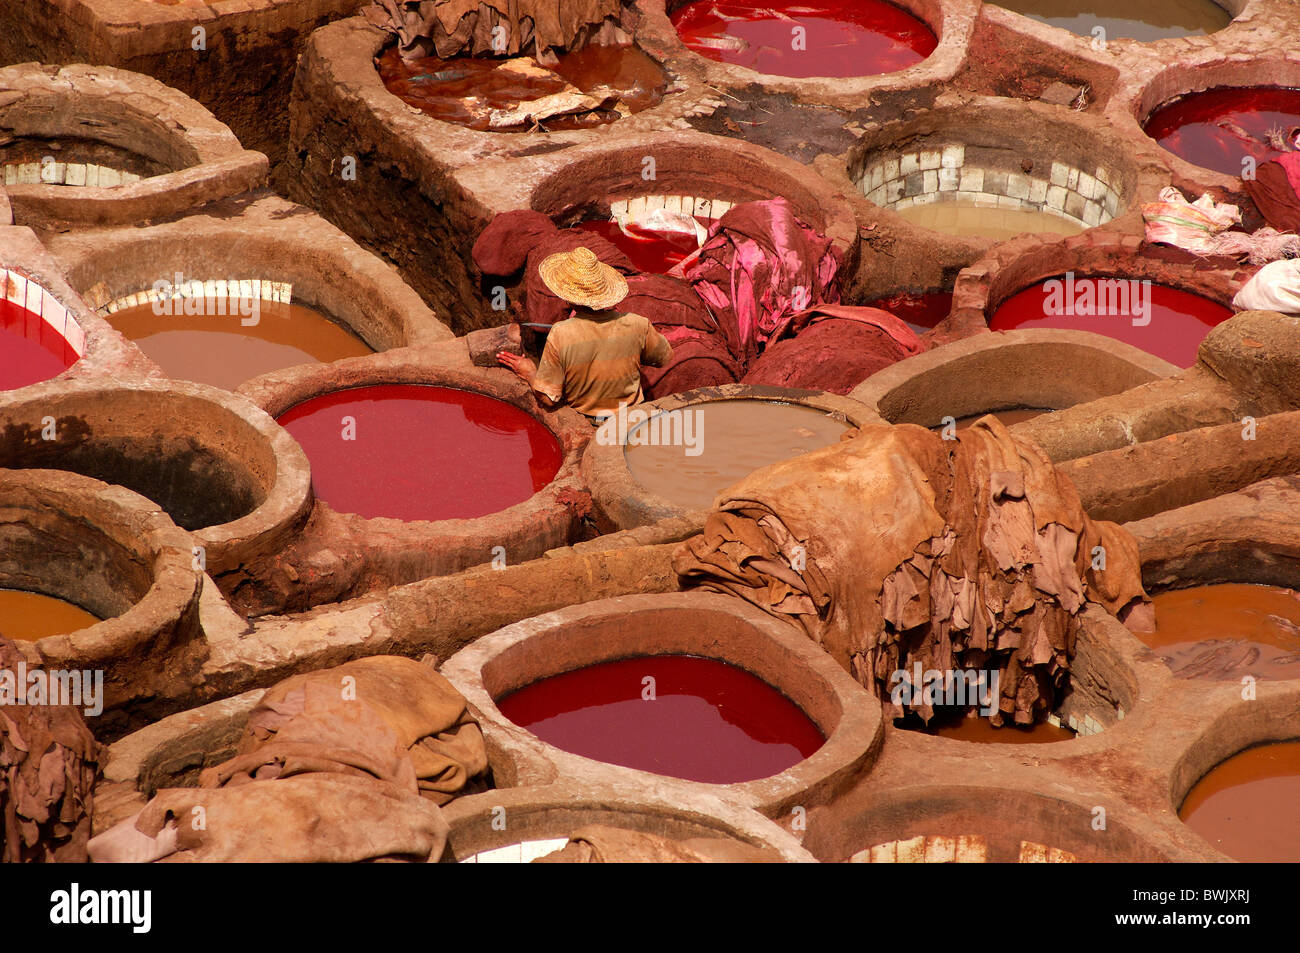 tanning tanner leather animal skins workers containers craft fir ream fez el Bali Medina Old Town fez Morocco North Africa Stock Photo